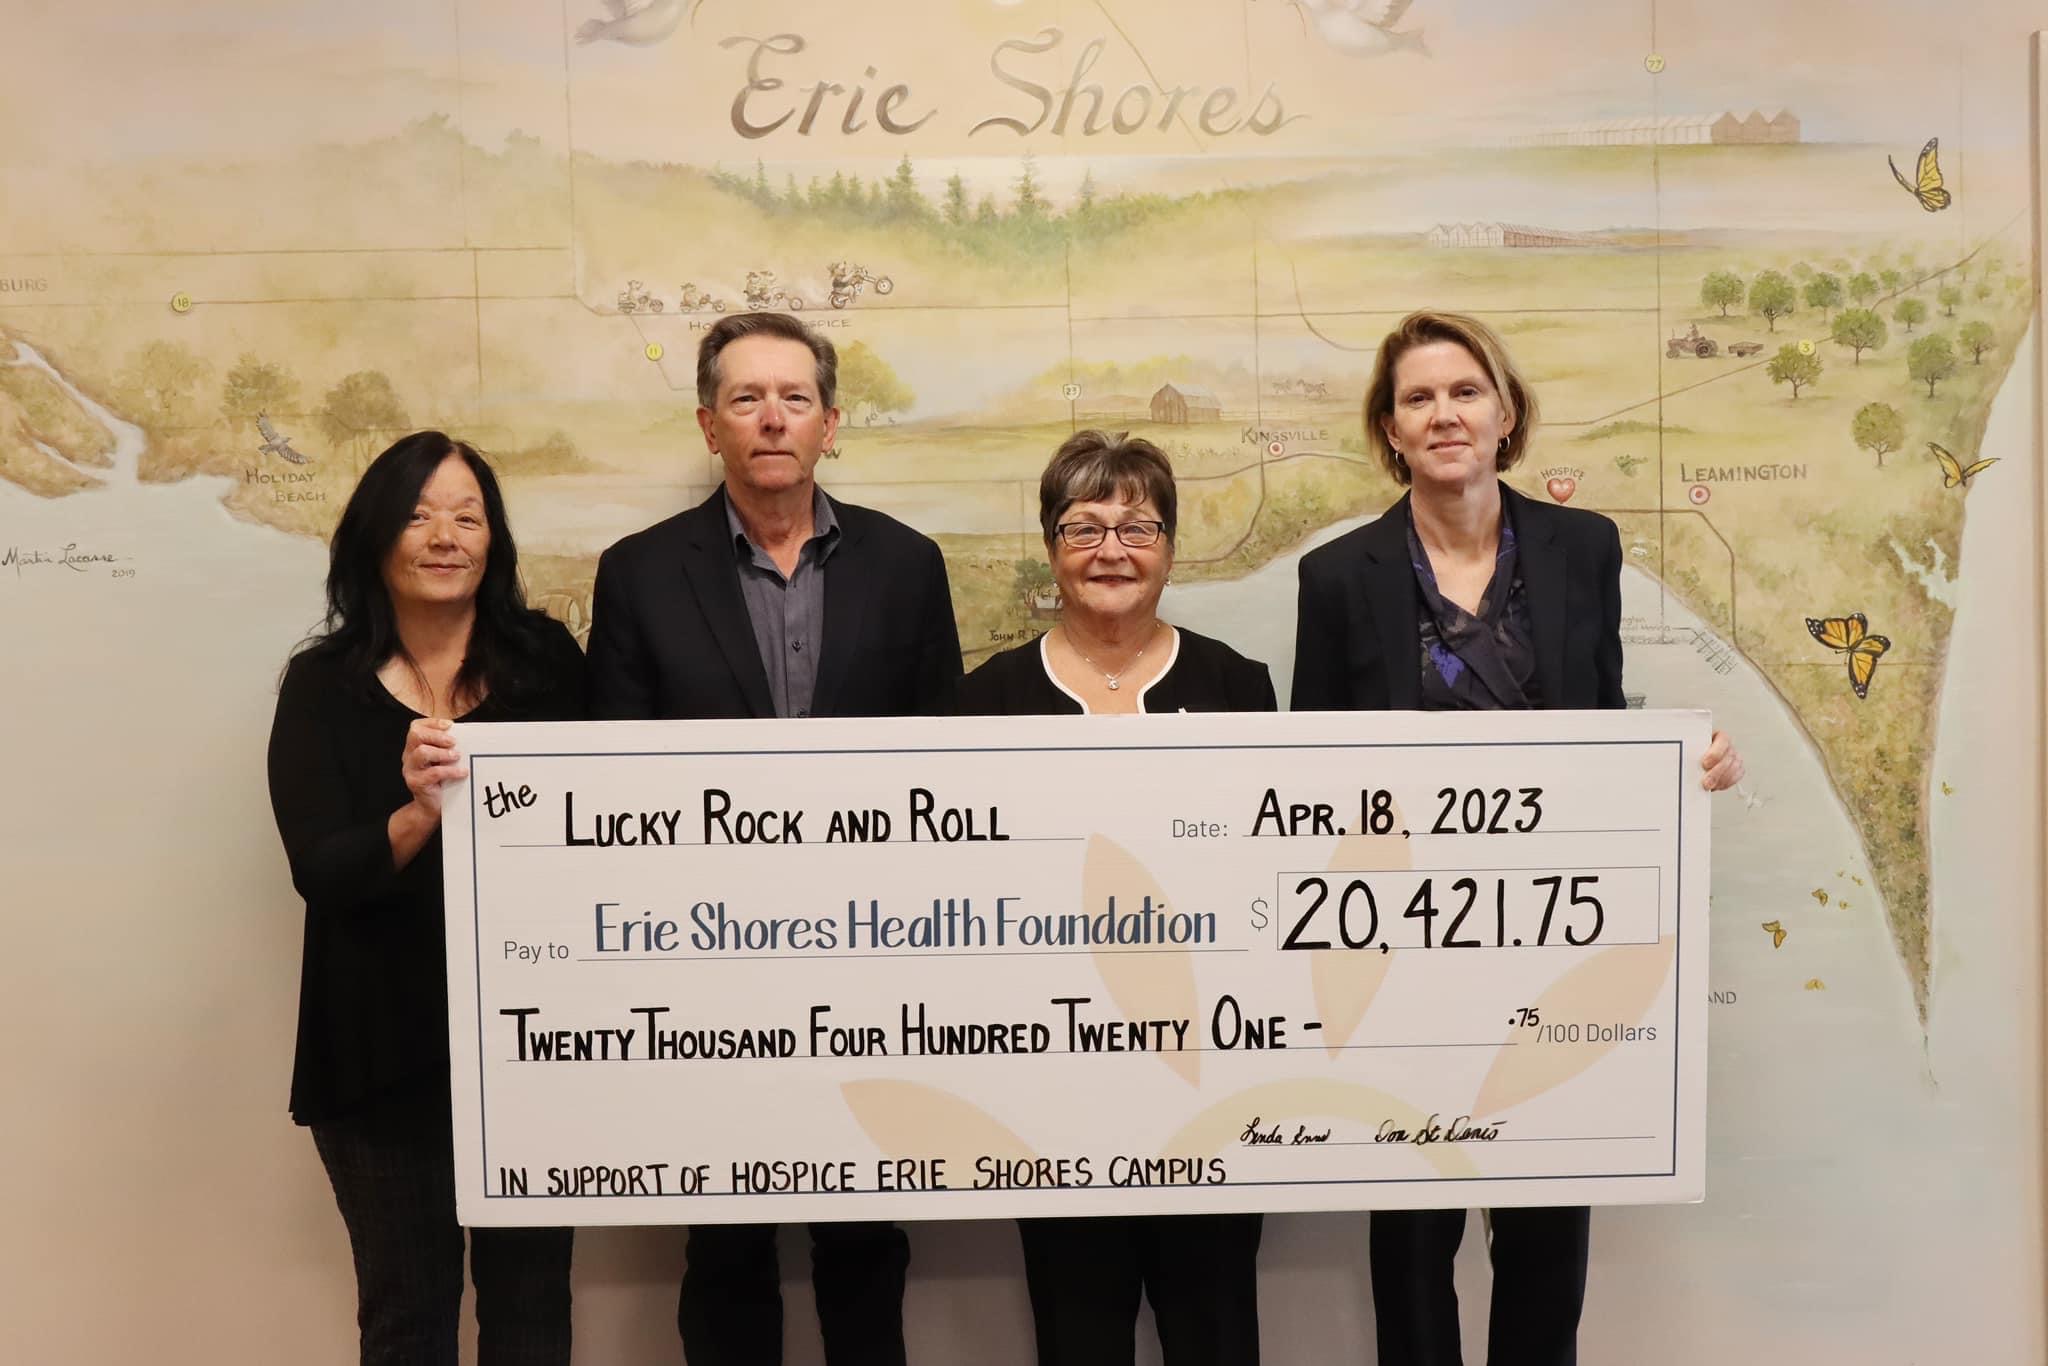 The Lucky Rock and Roll Raises A $20,421.75 Pot of Gold for The Hospice, Erie Shores Campus